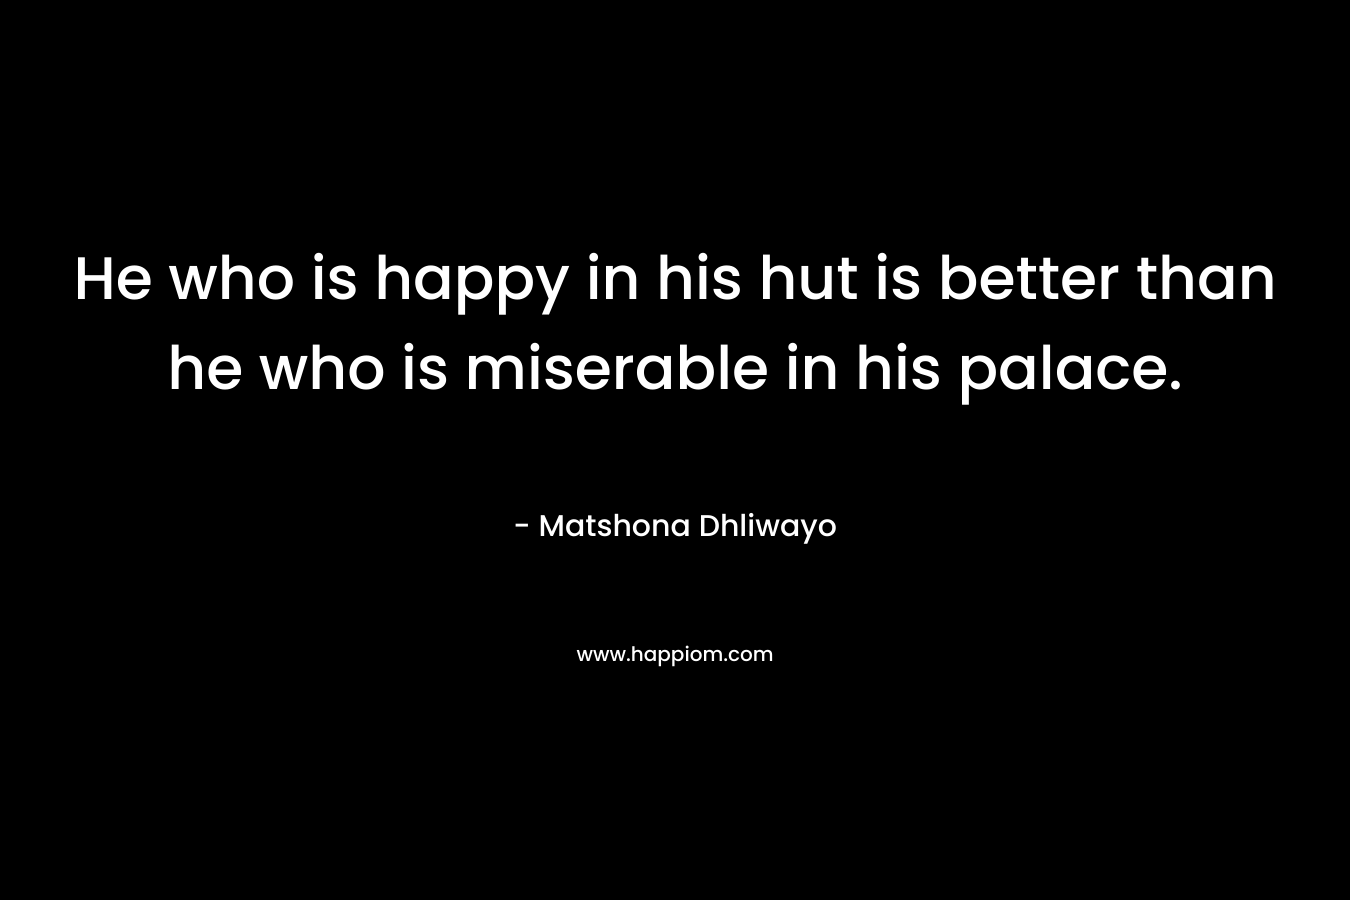 He who is happy in his hut is better than he who is miserable in his palace.